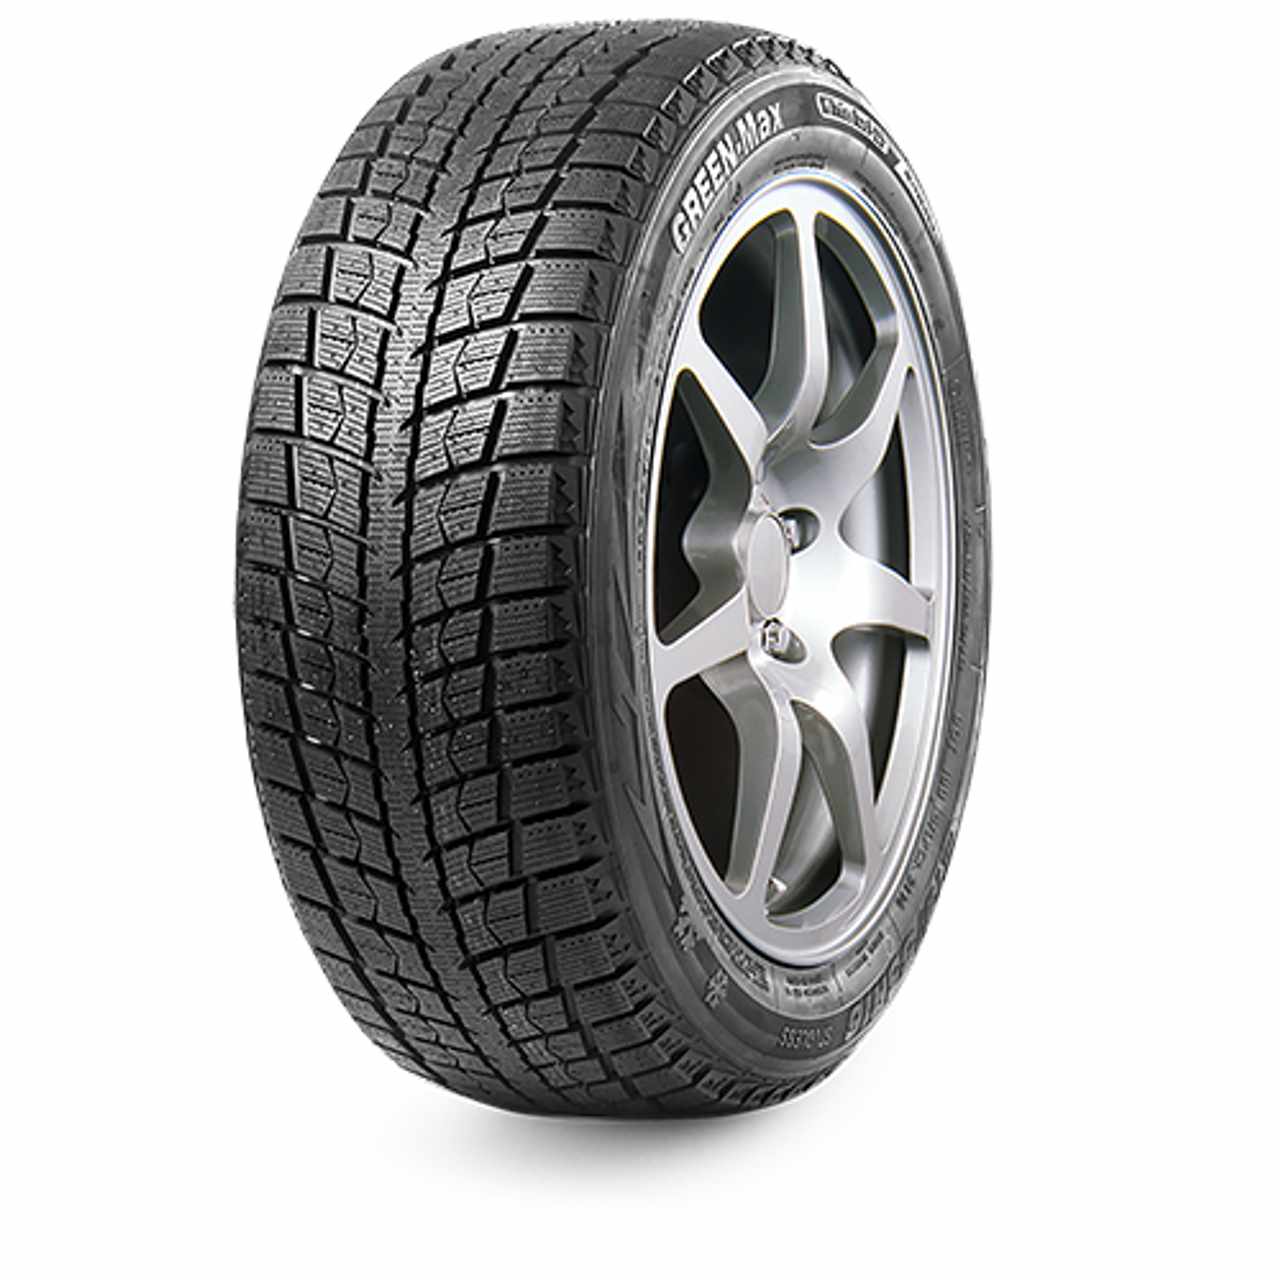 LINGLONG GREEN-MAX WINTER ICE I-15 SUV 225/55R18 98T NORDIC COMPOUND MFS BSW